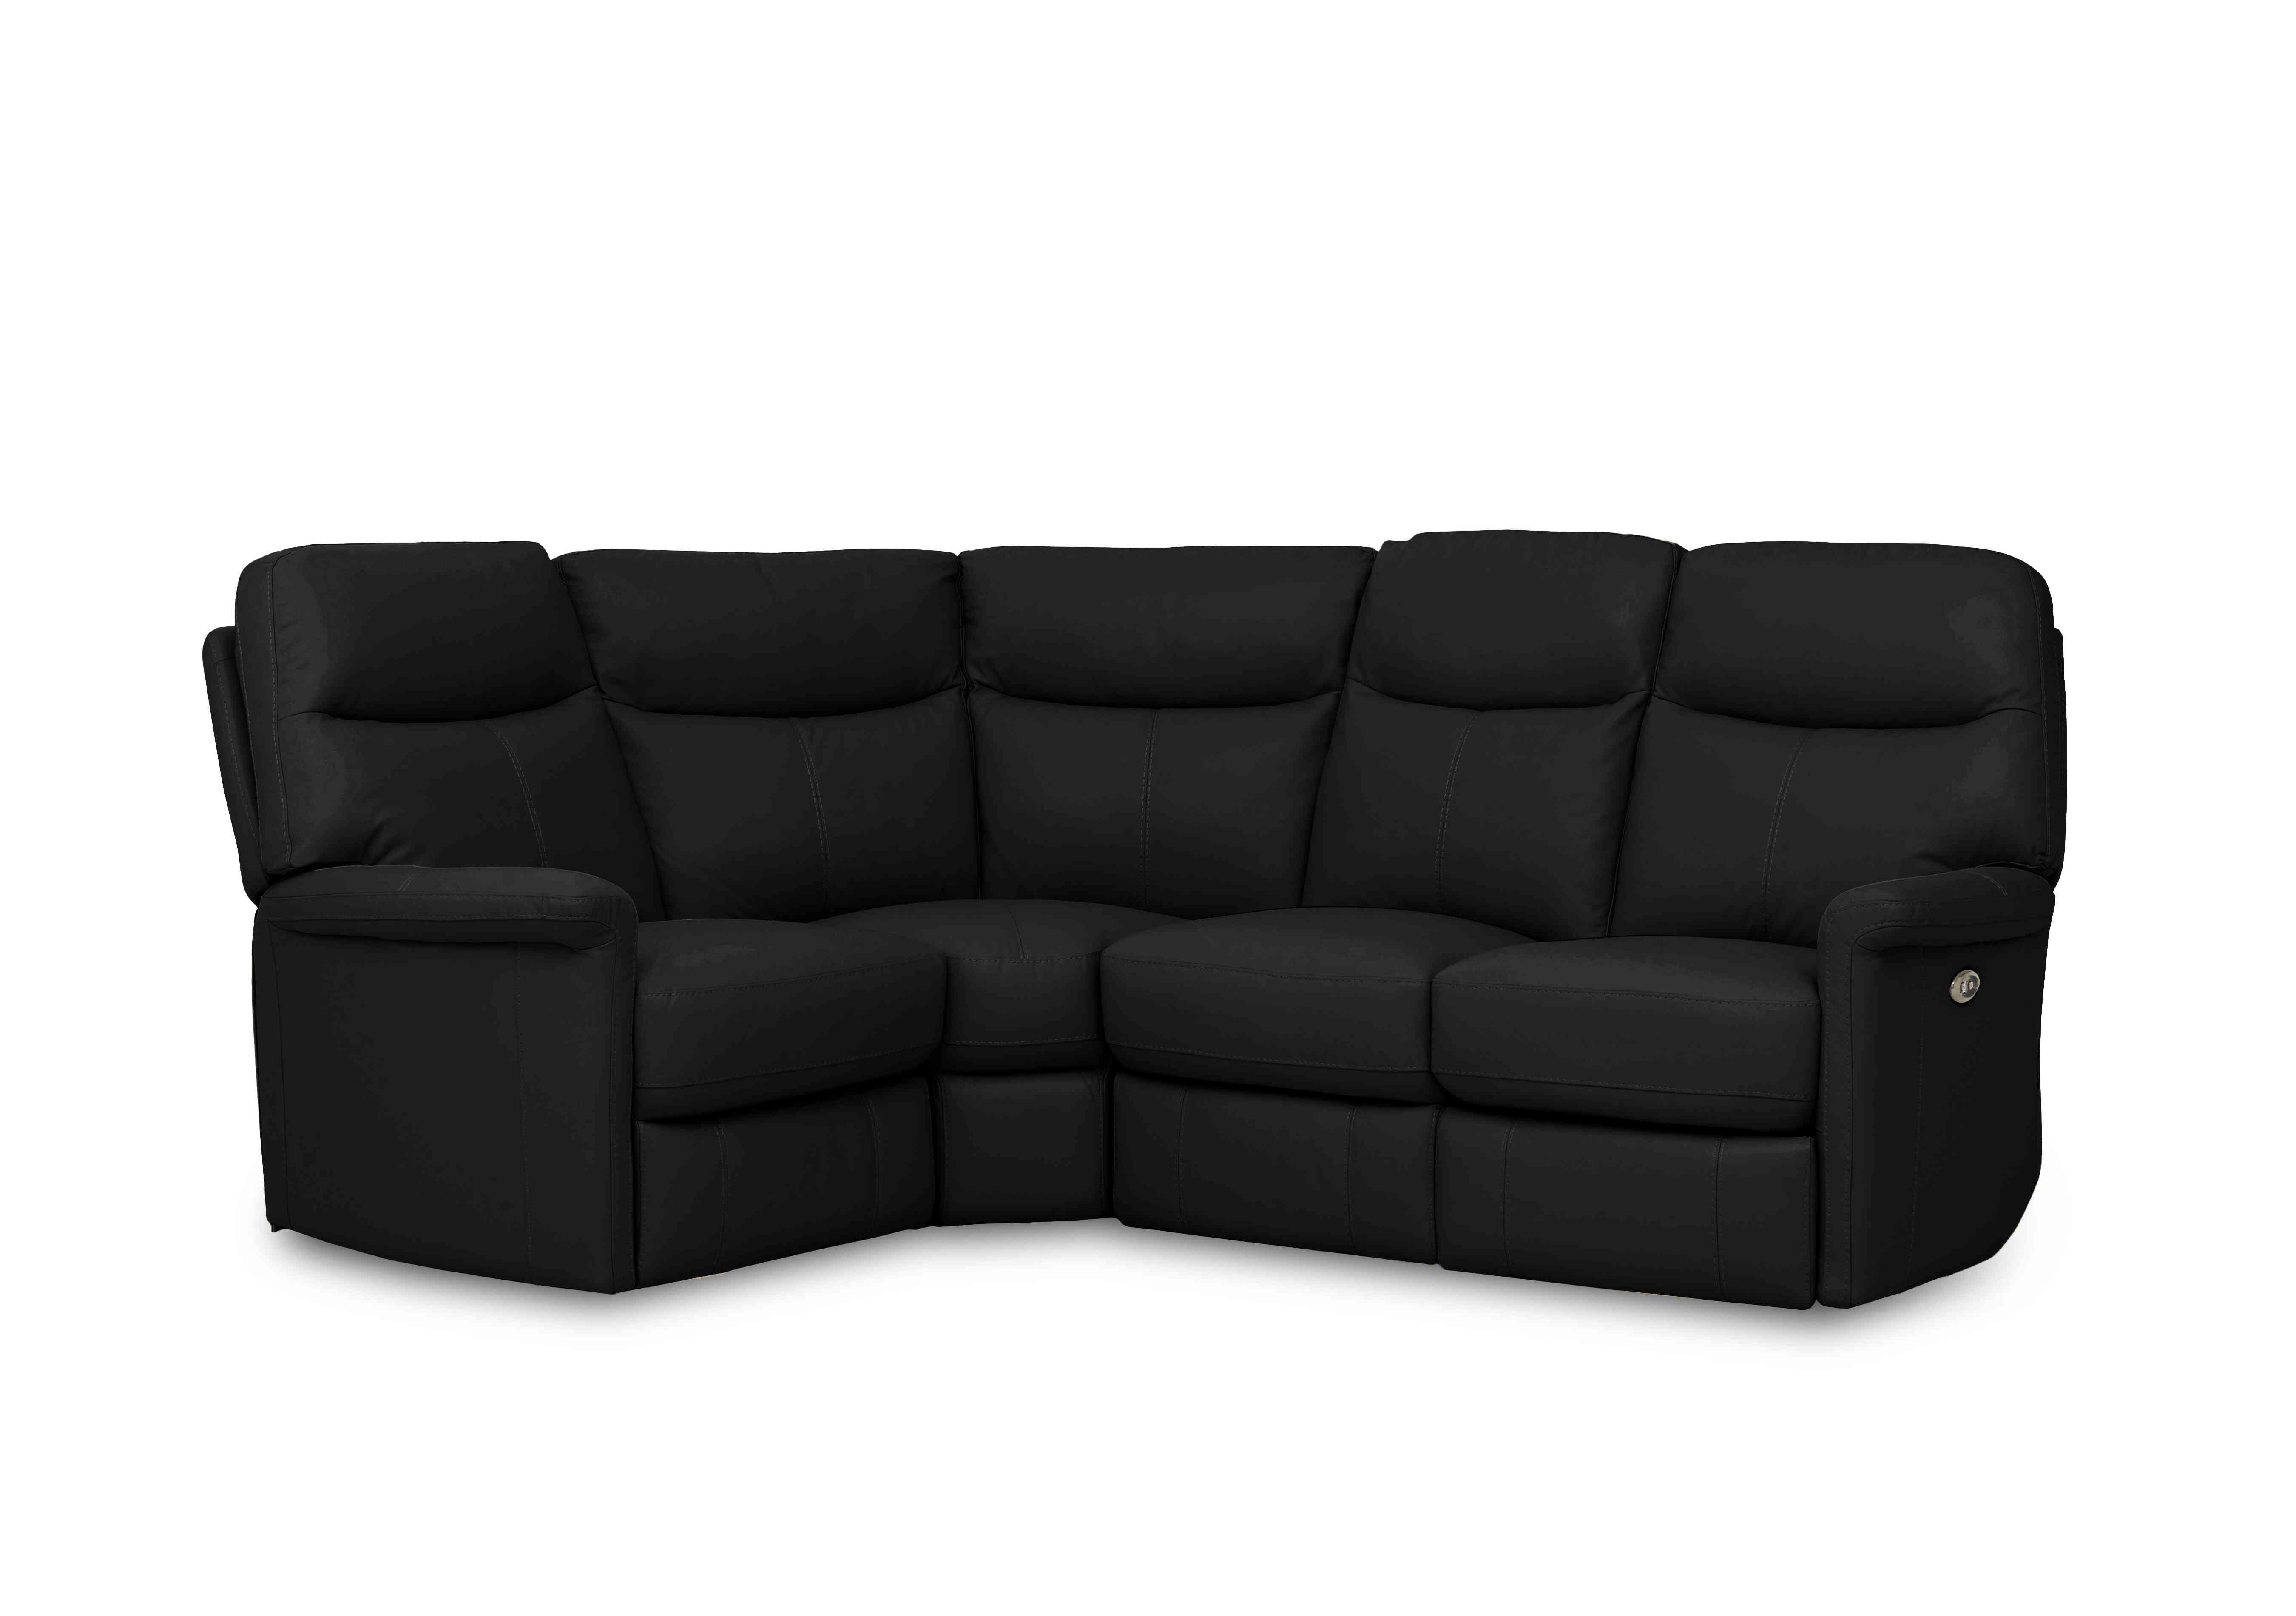 Compact Collection Lille Leather Corner Sofa in Bv-3500 Classic Black on Furniture Village